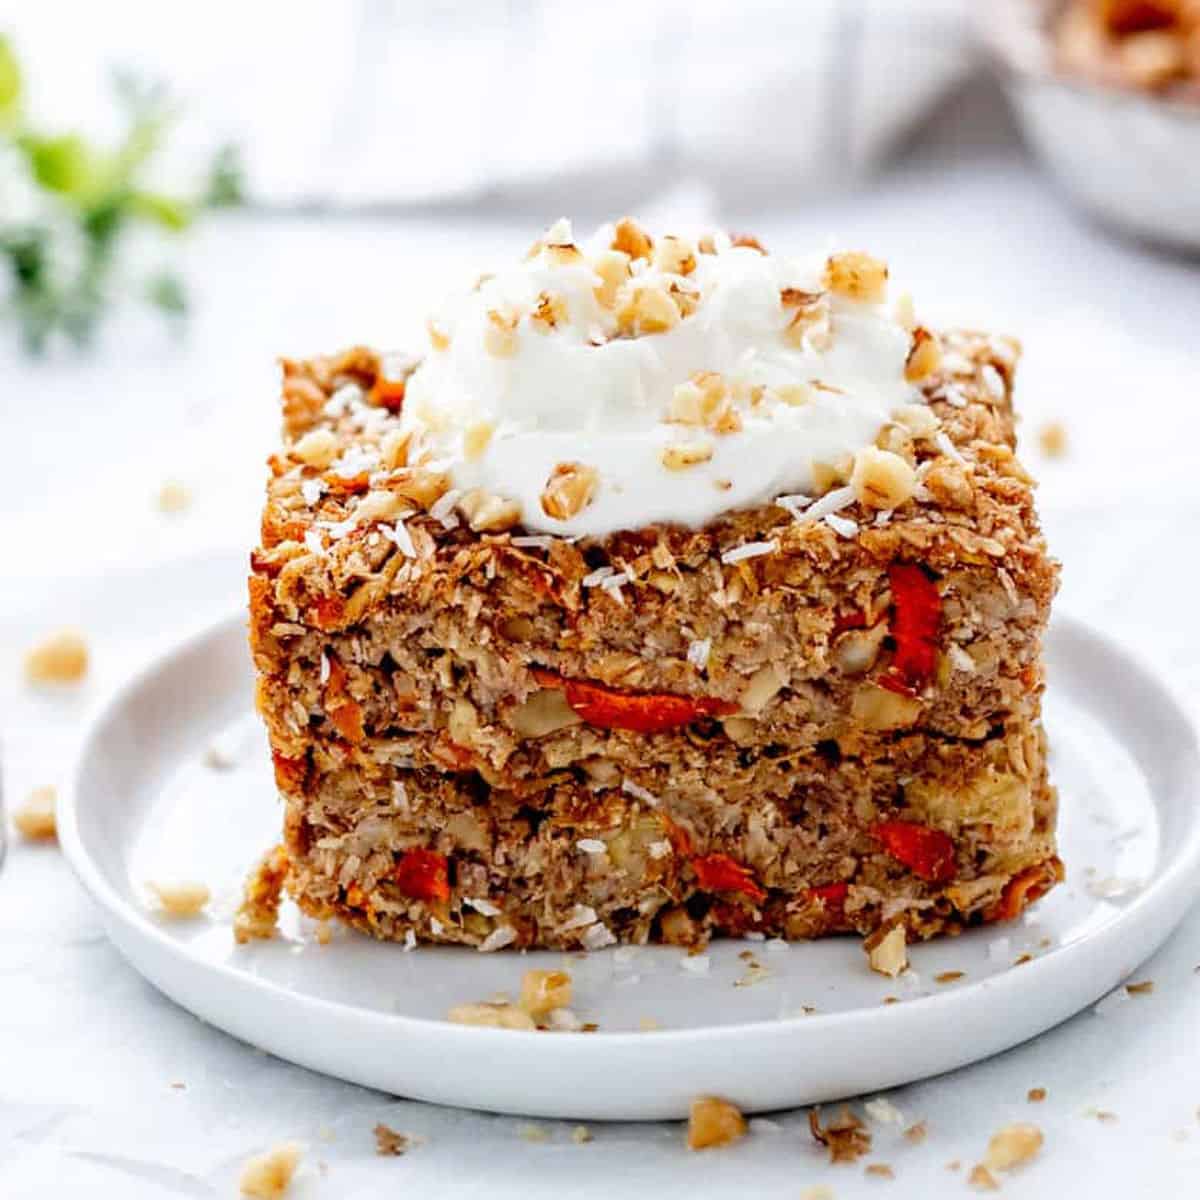 Two carrot cake oatmeal bars on a plate stacked on top of each other.